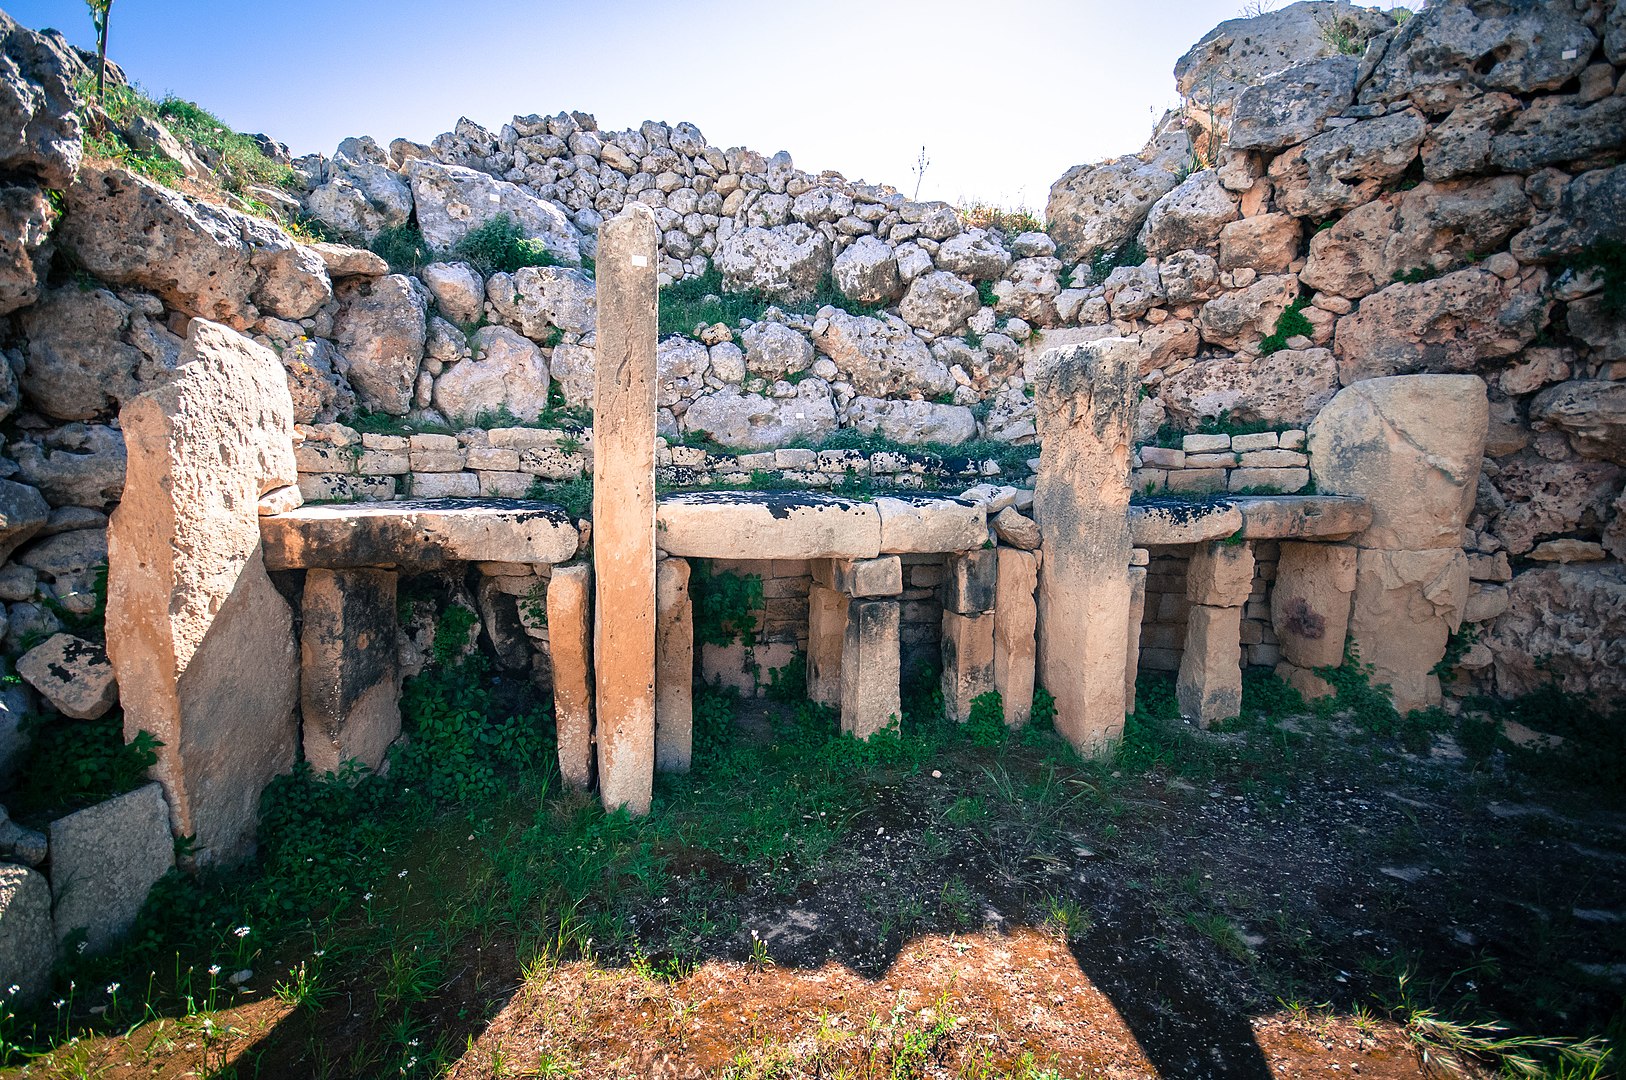 The Ġgantija temples of Malta are among the earliest free-standing buildings known. Image credit - Bs0u10e01, licensed under CC BY-SA 4.0